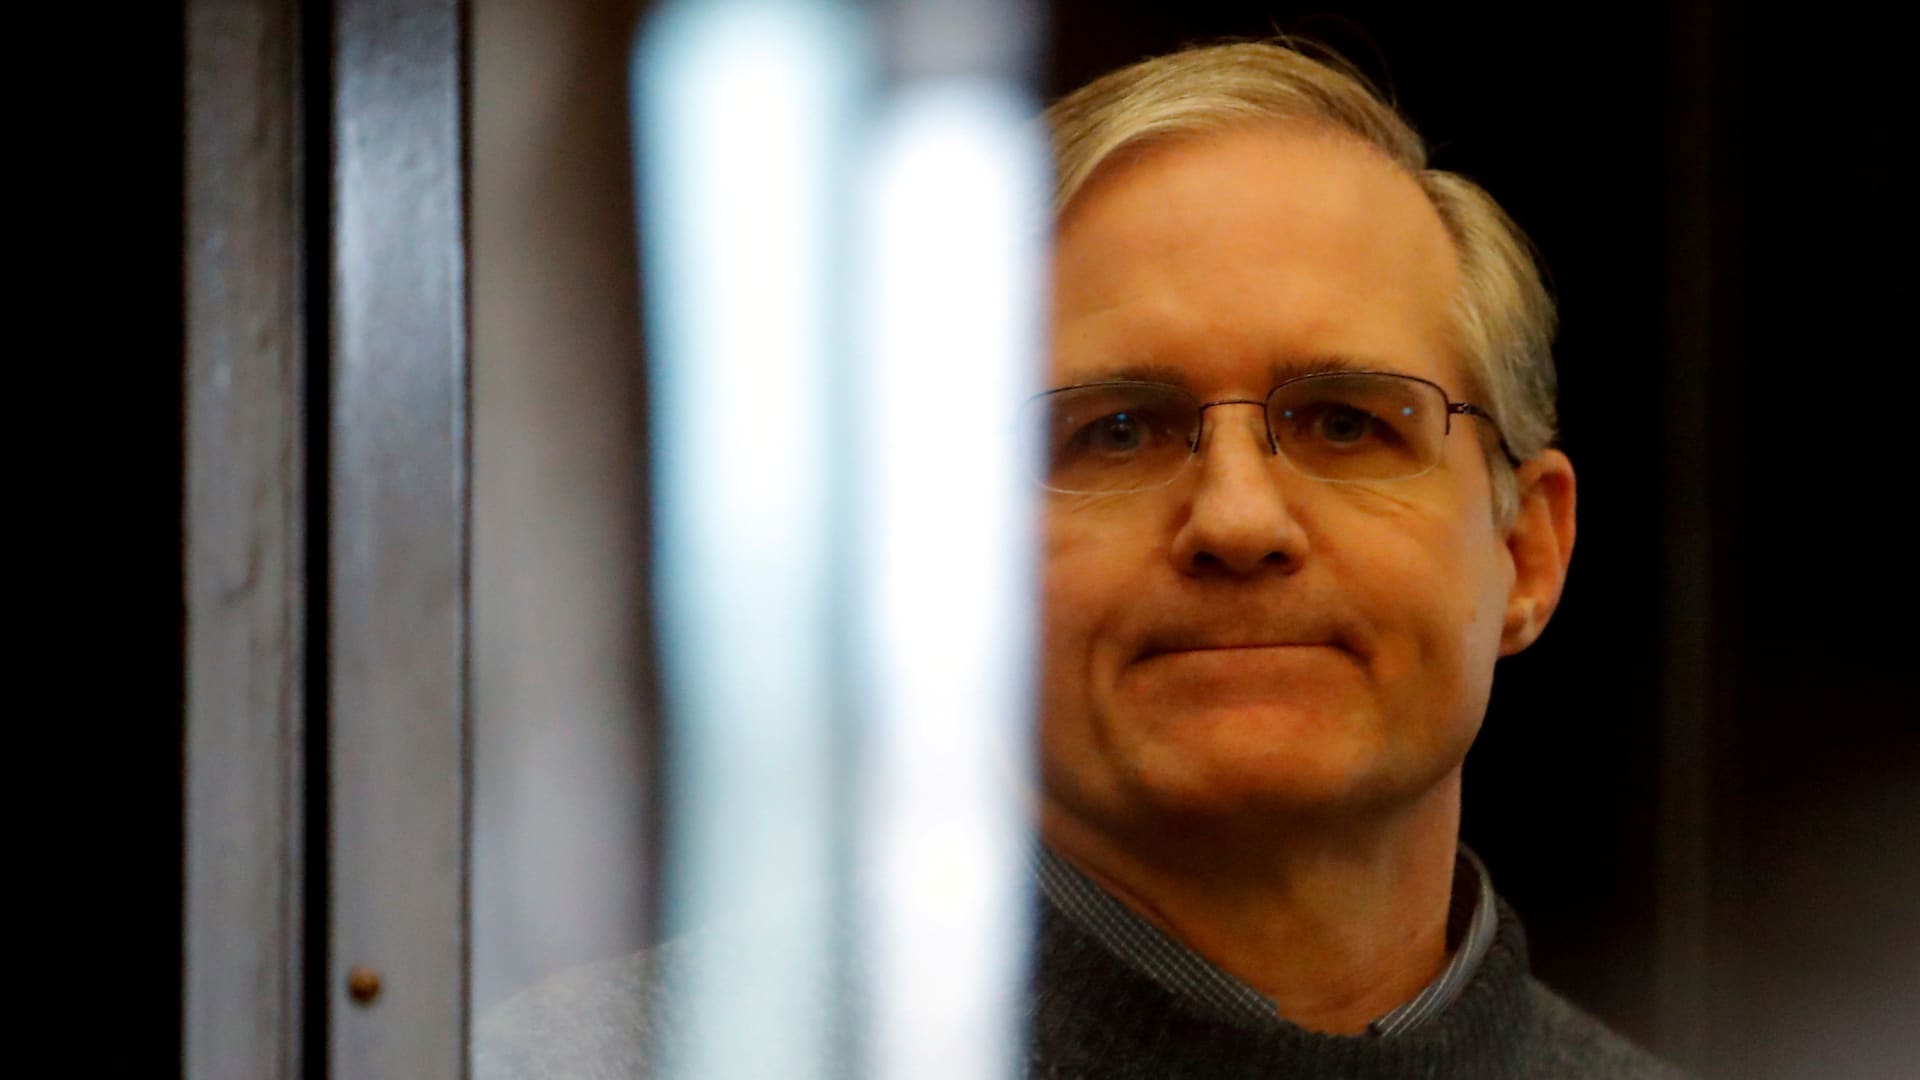 Former U.S. Marine Paul Whelan, who was detained and accused of espionage, stands inside a defendants' cage during his verdict hearing in Moscow, Russia June 15, 2020.